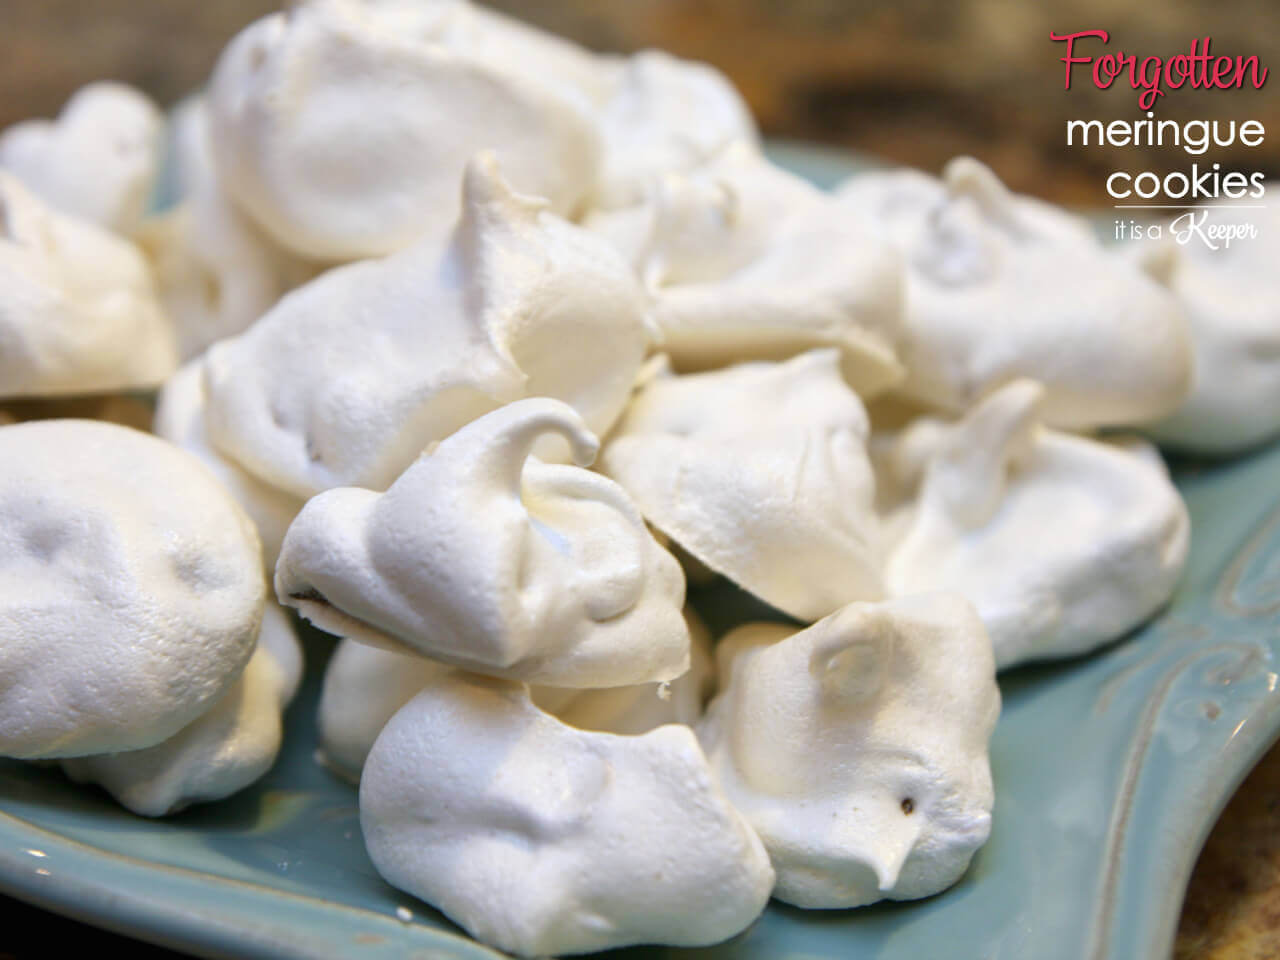  Forgotten Meringue Cookies - this is one of my grandmother's signature easy cookie recipes. They're called Forgotten Cookies because you put them in the oven and forget about them 